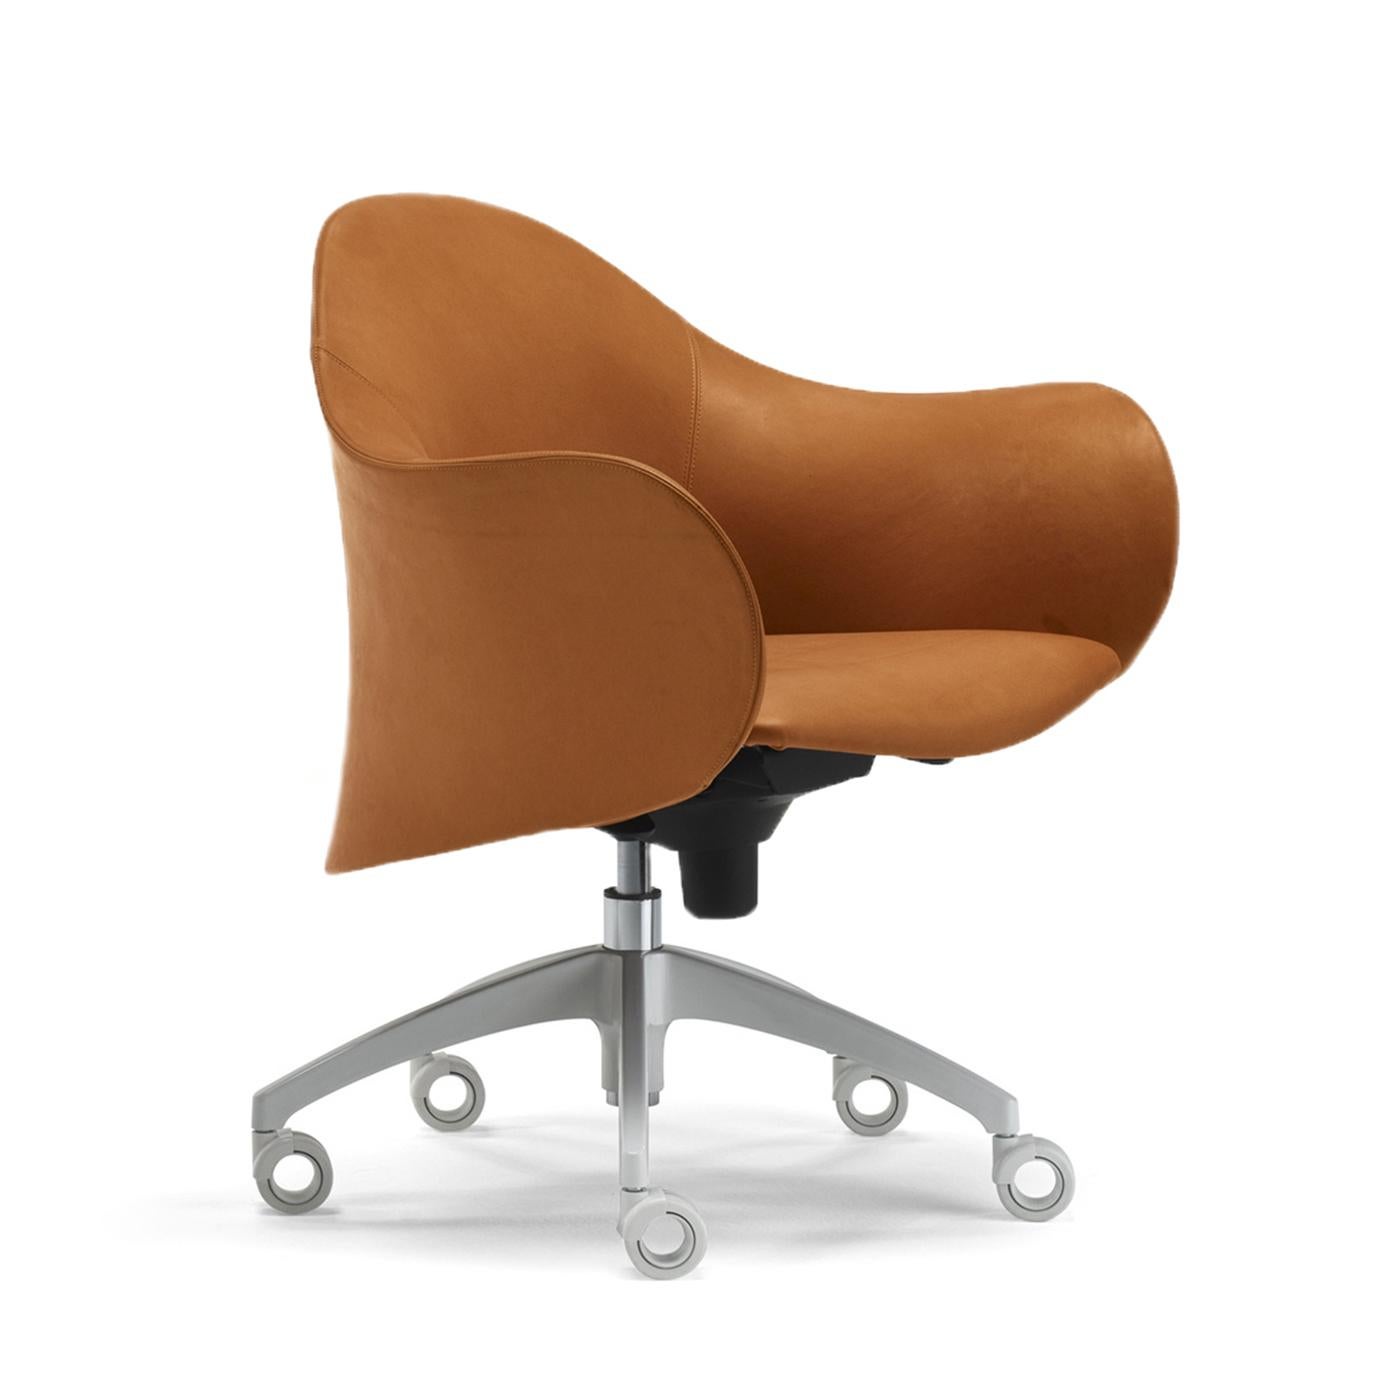 Part of the Lopod collection, this chair is designed by Giulio Manzoni and features a structural polyurethane outer shell covered with soft natural brown leather. The aluminum star base has a tilt control mechanism and is adjustable in height (max.